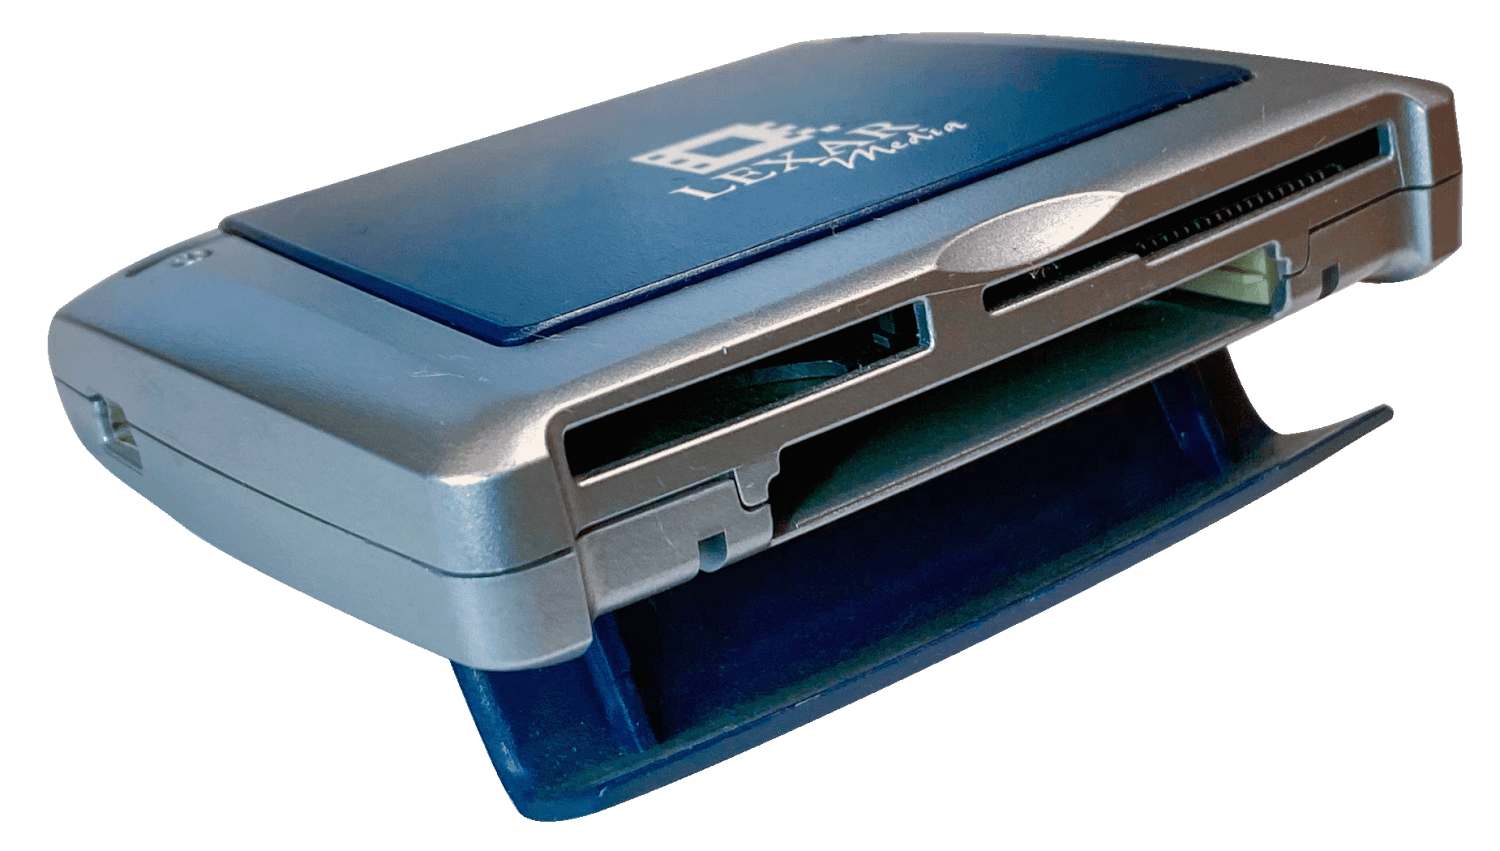 A Lexar multi-card reader with slots for SD, CF, and Memory Stick cards